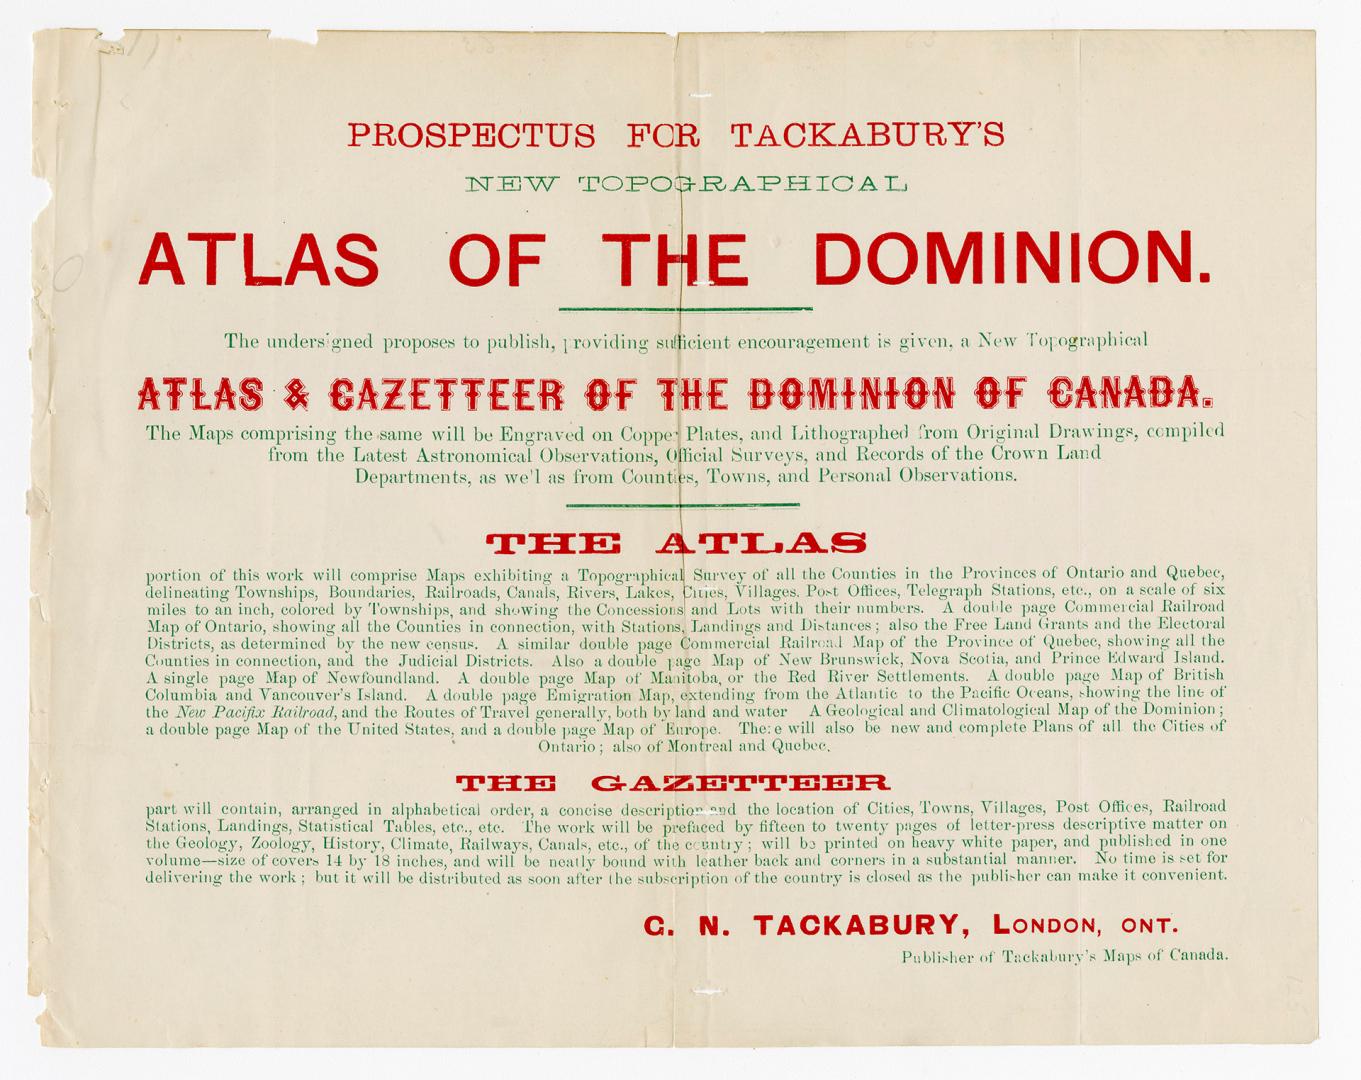 Prospectus for Tackabury's new topographical atlas of the Dominion